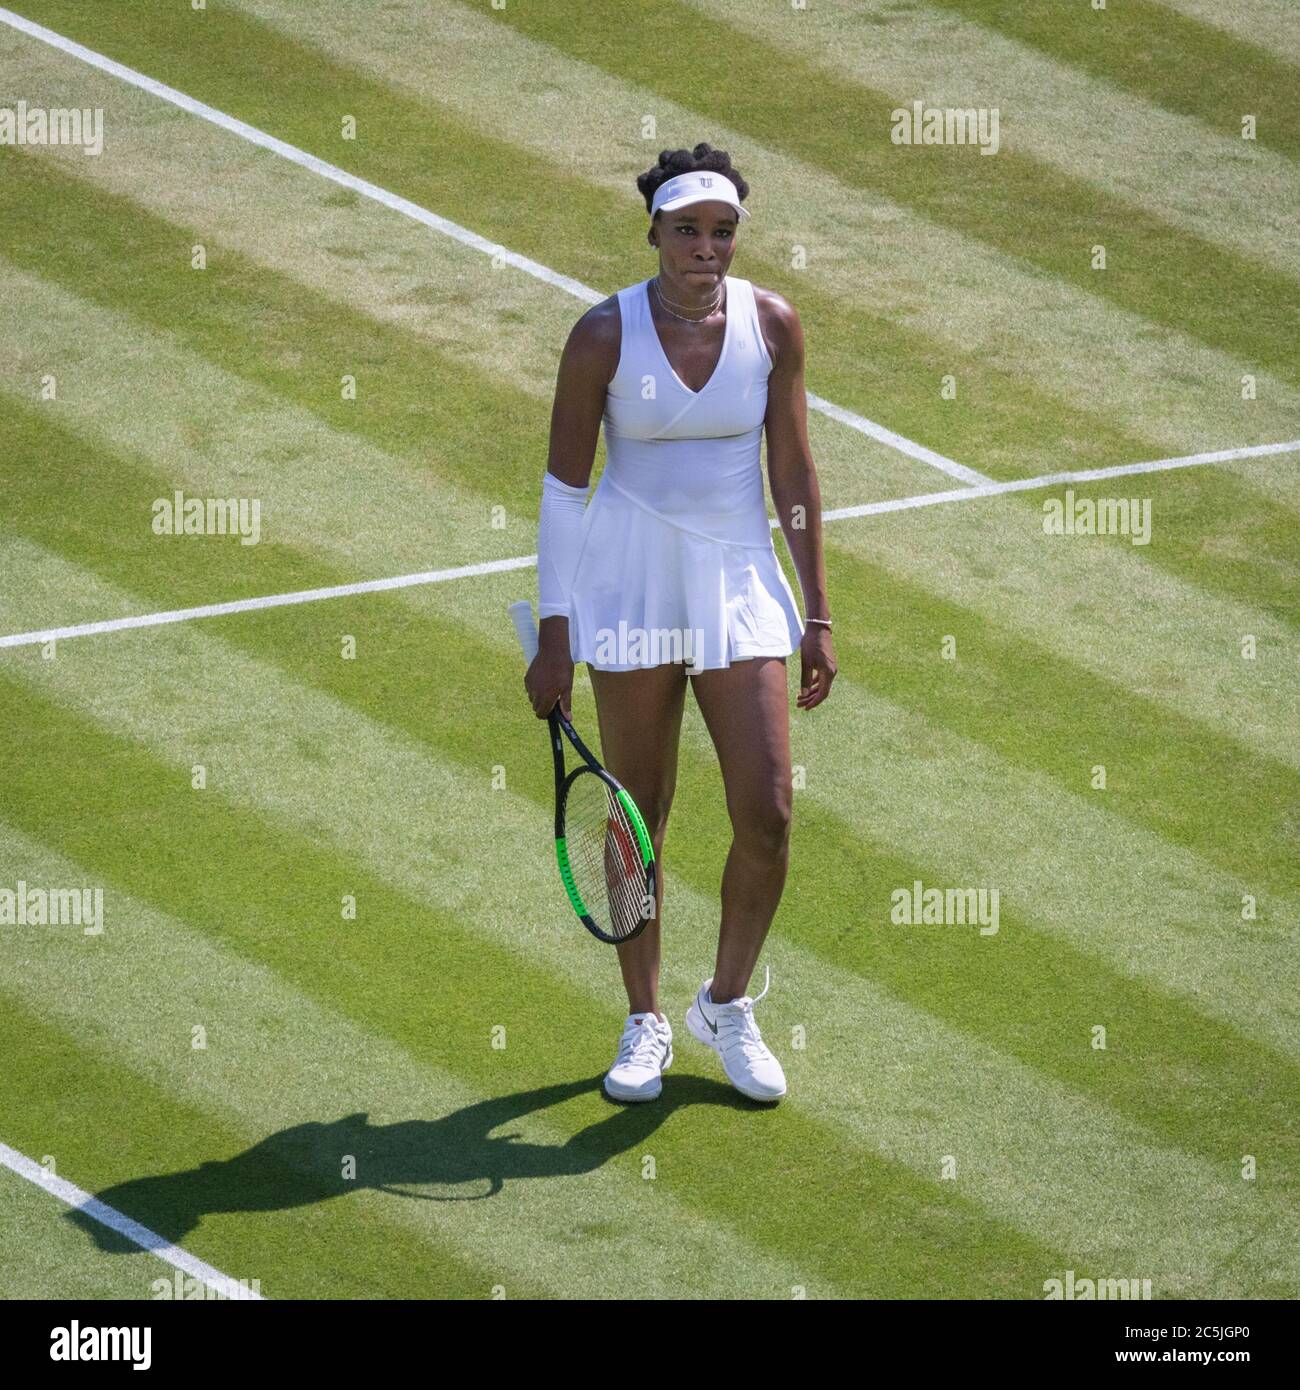 American Tennis player Venus Williams in a match at The Championships 2018, Wimbledon All England Lawn Tennis Club, London, UK Stock Photo